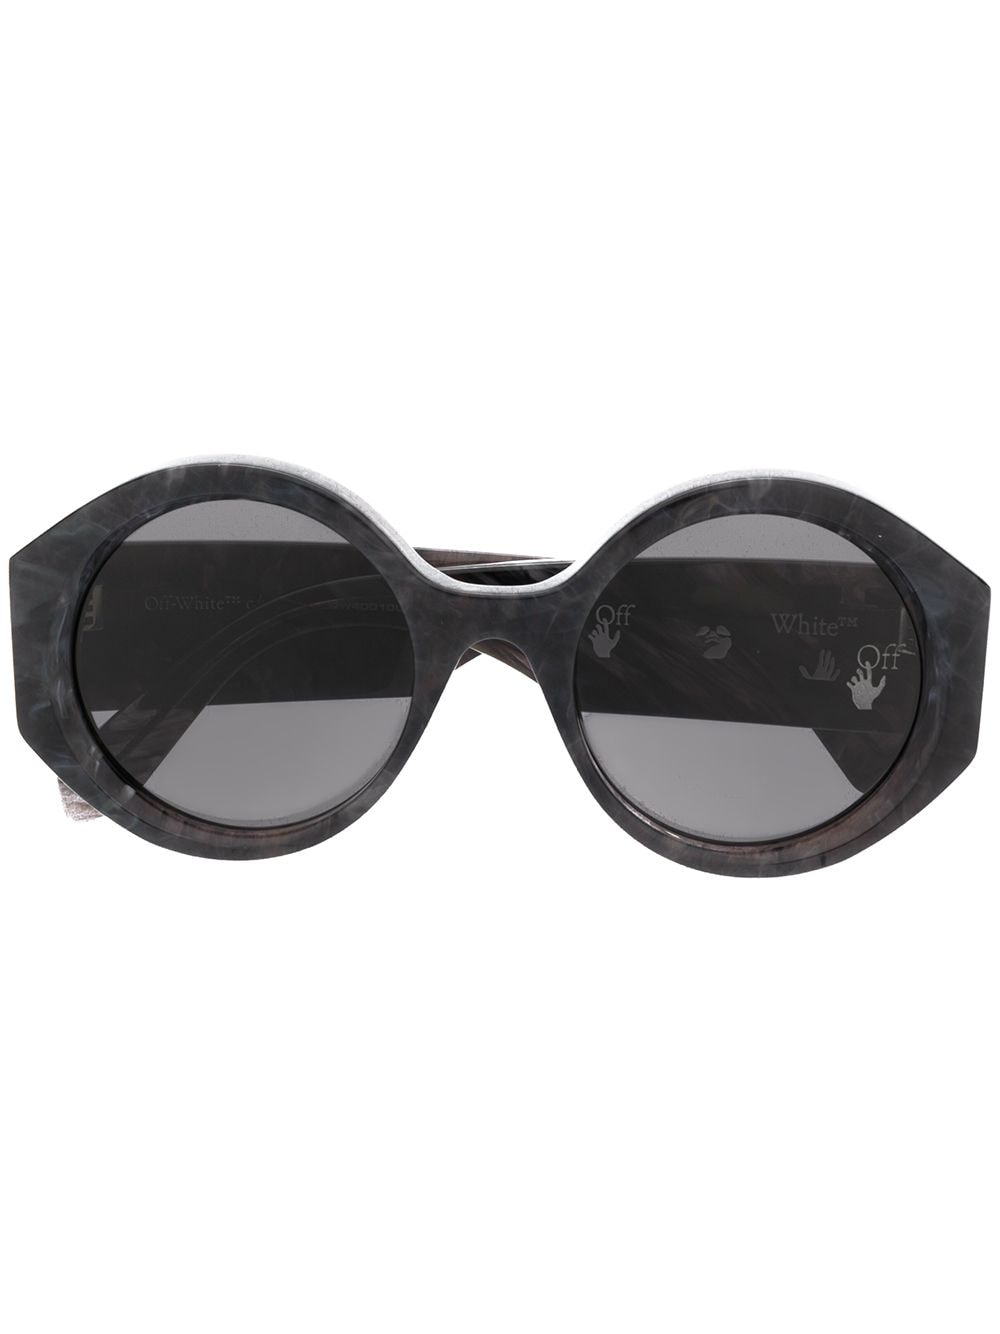 Off-White Manchester rectangle-frame Sunglasses - Farfetch